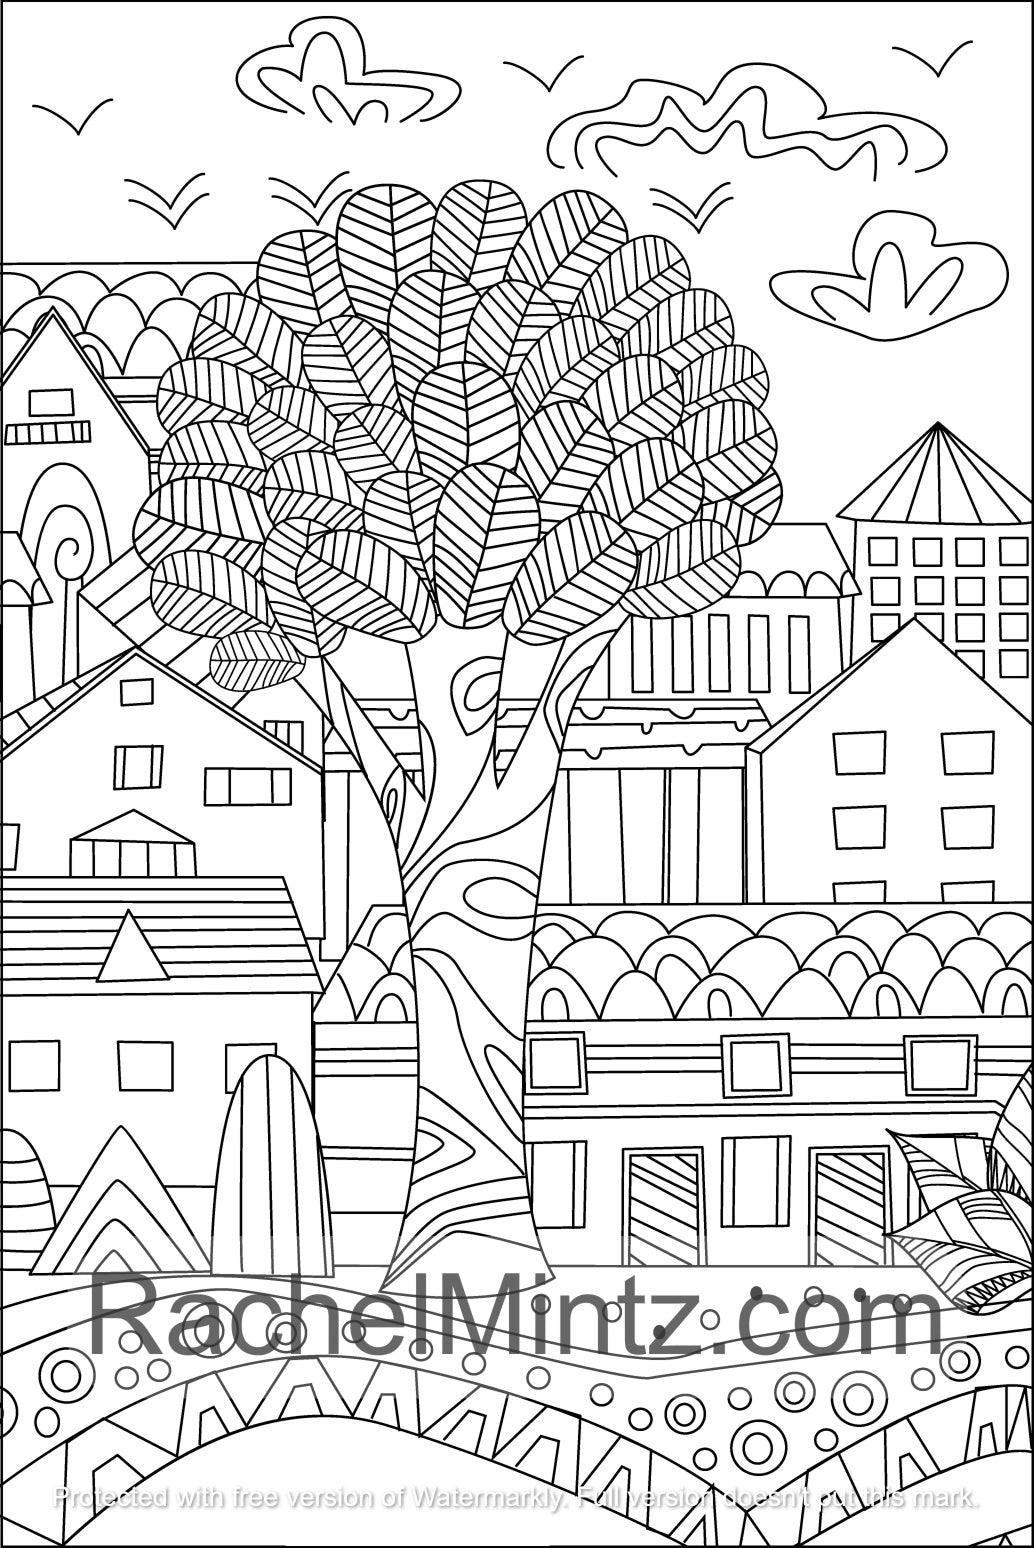 Crystal Mind Landscapes - Adults PDF Coloring Book With Gorgeous Anti Stress Patterns